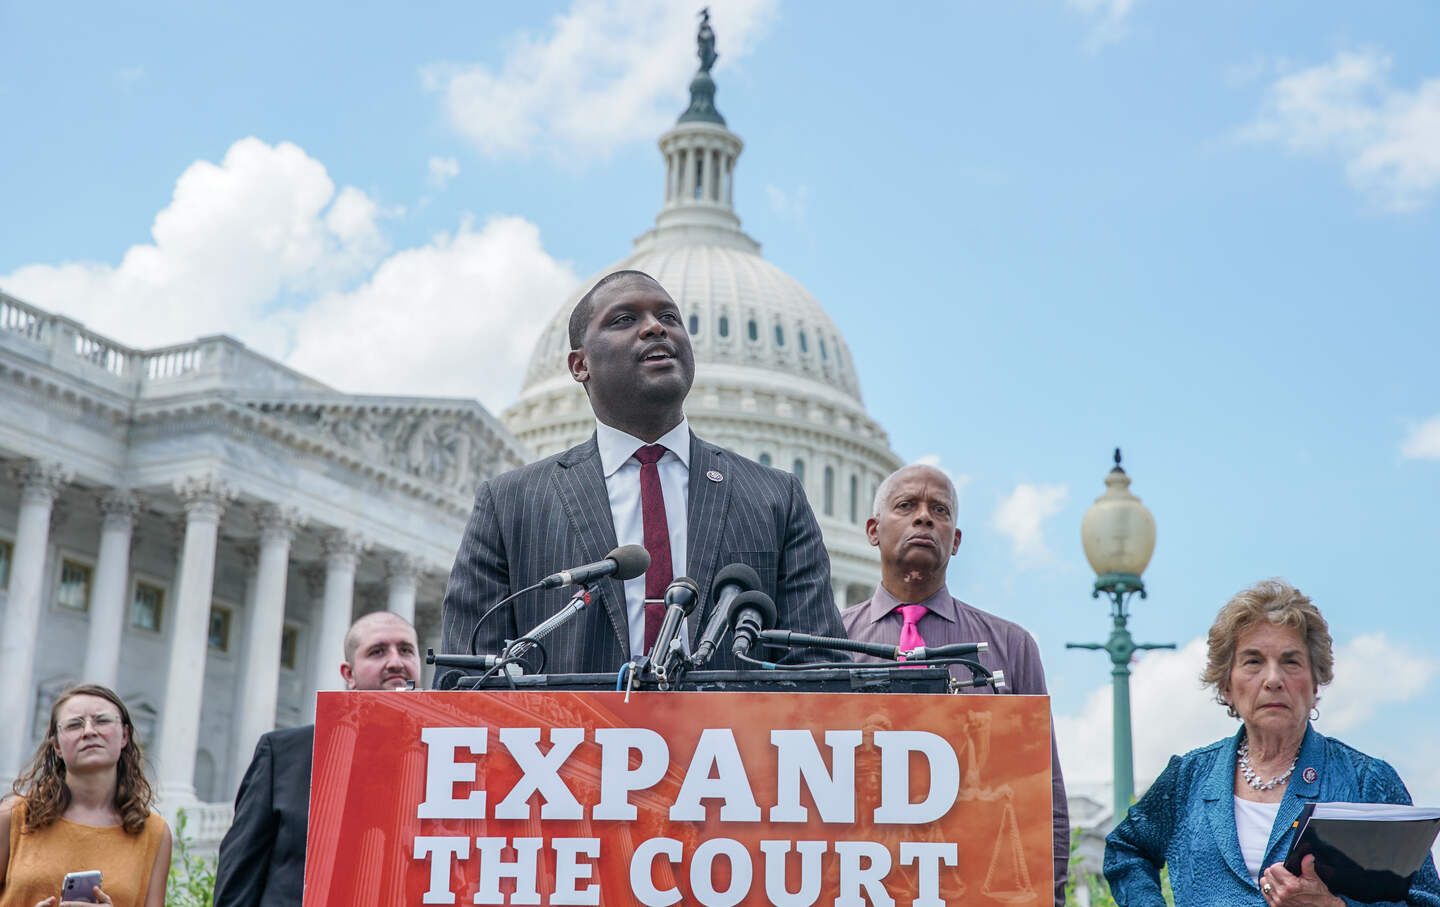 Representative Mondaire Jones (D-N.Y.) speaks at a press conference calling for the expansion of the Supreme Court on July 18, 2022, in Washington, D.C.